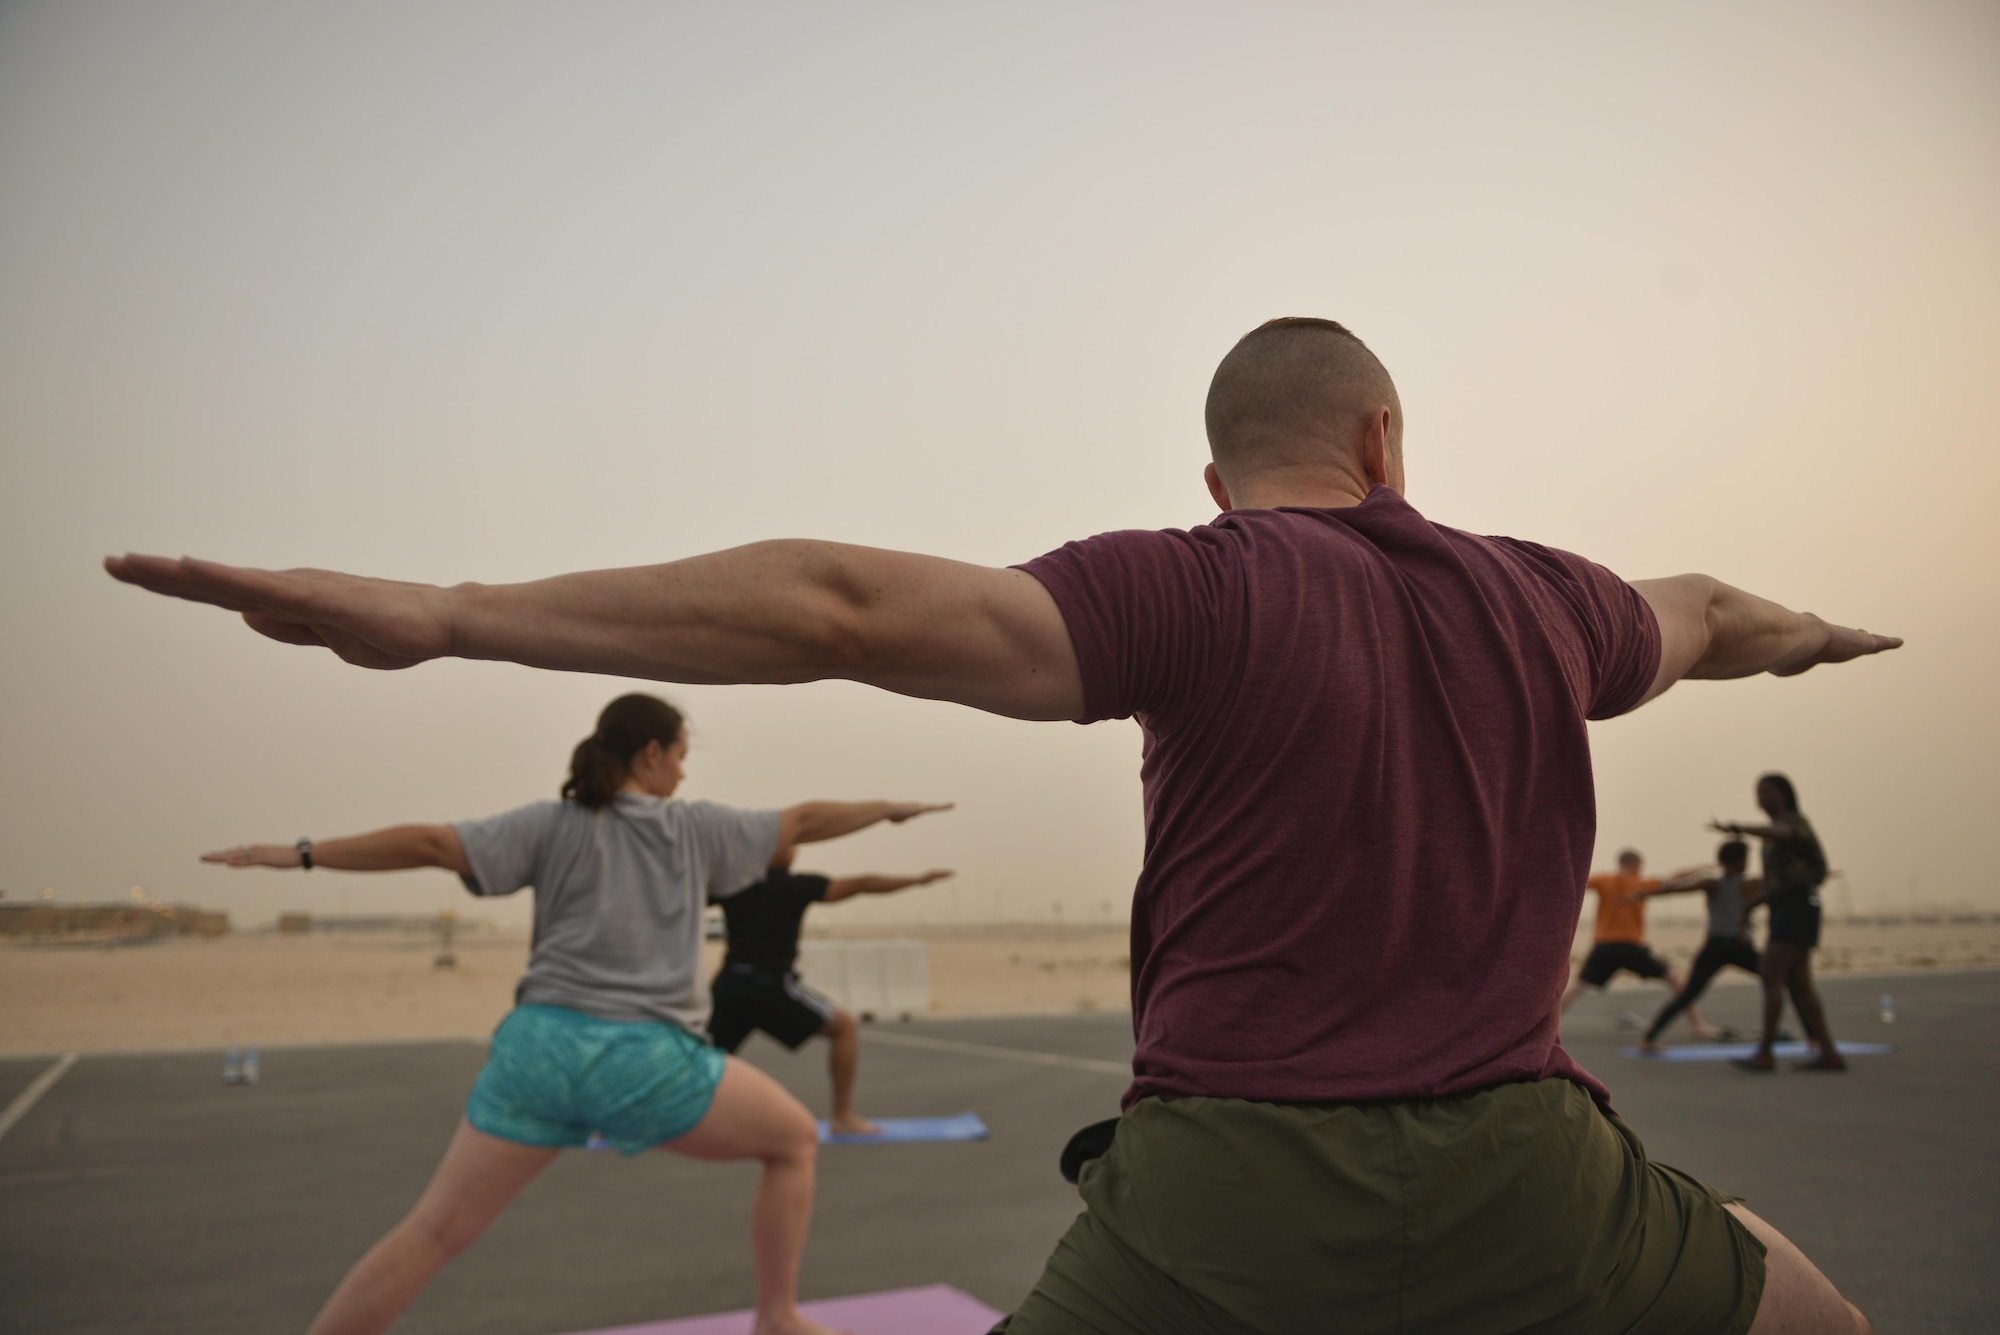 Deployed Soldiers, sailors, airmen, marines, coalition partners and civilians go into the Warrior Two pose during the largest Yoga session to take place in Qatar history July 11, 2015 Al Udeid Air Base, Qatar. This event opened its doors to all levels of practitioners from novice to expert. It allowed the fine men and women assigned to Al Udeid Air Base to relax and enjoy a different kind of exercise in a neutral environment. (U.S. Air Force photo/Staff Sgt. Alexandre Montes)